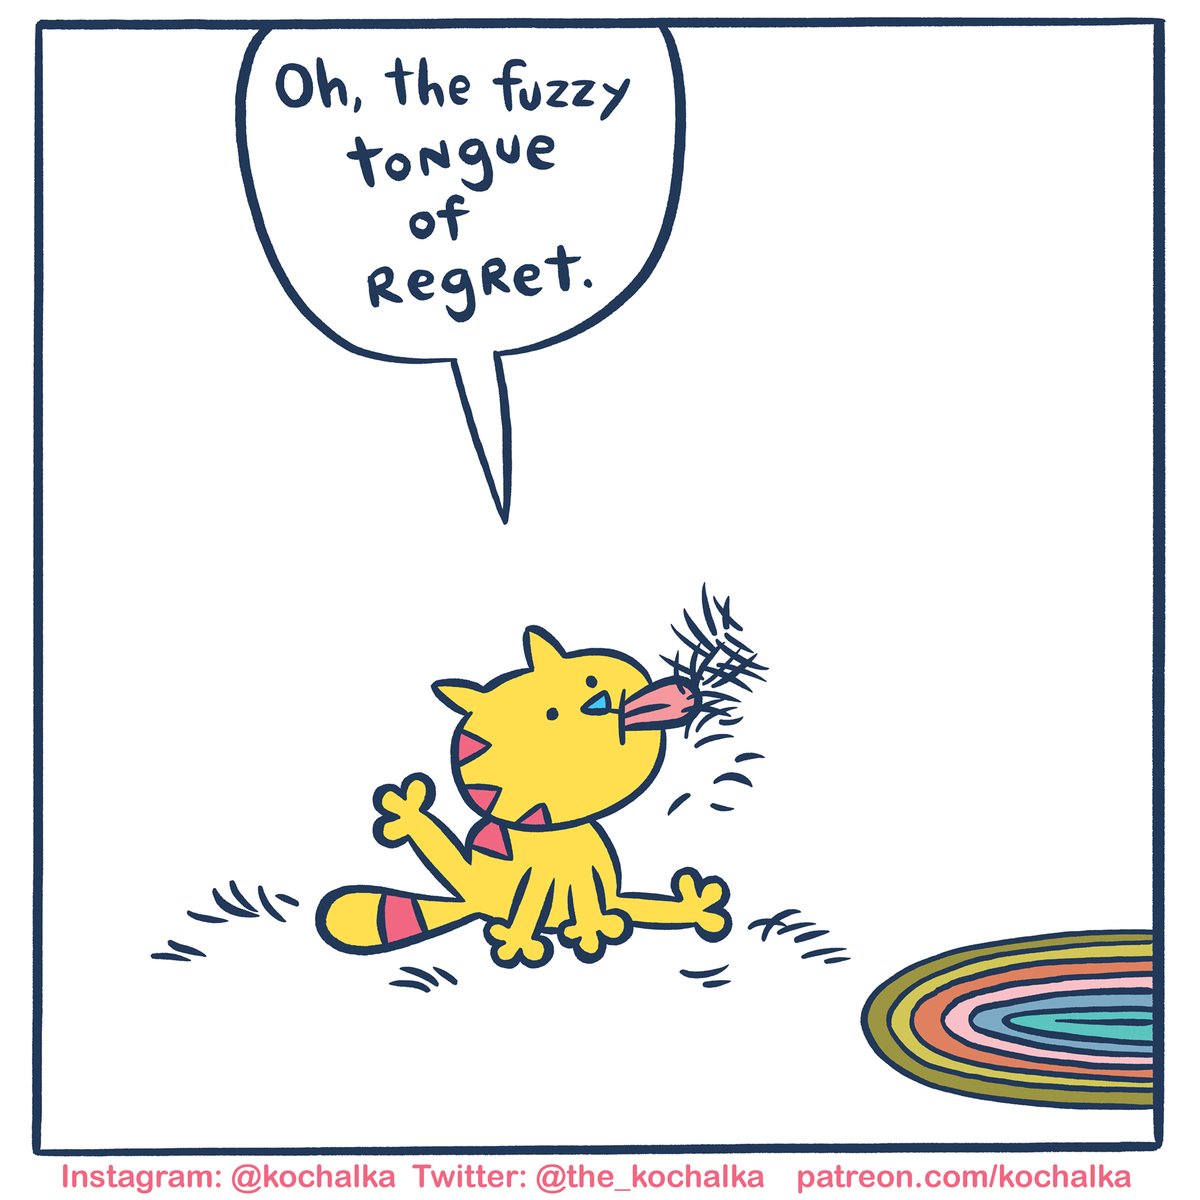 Don't worry, each Monday the universe resets! #FuzzyMonday